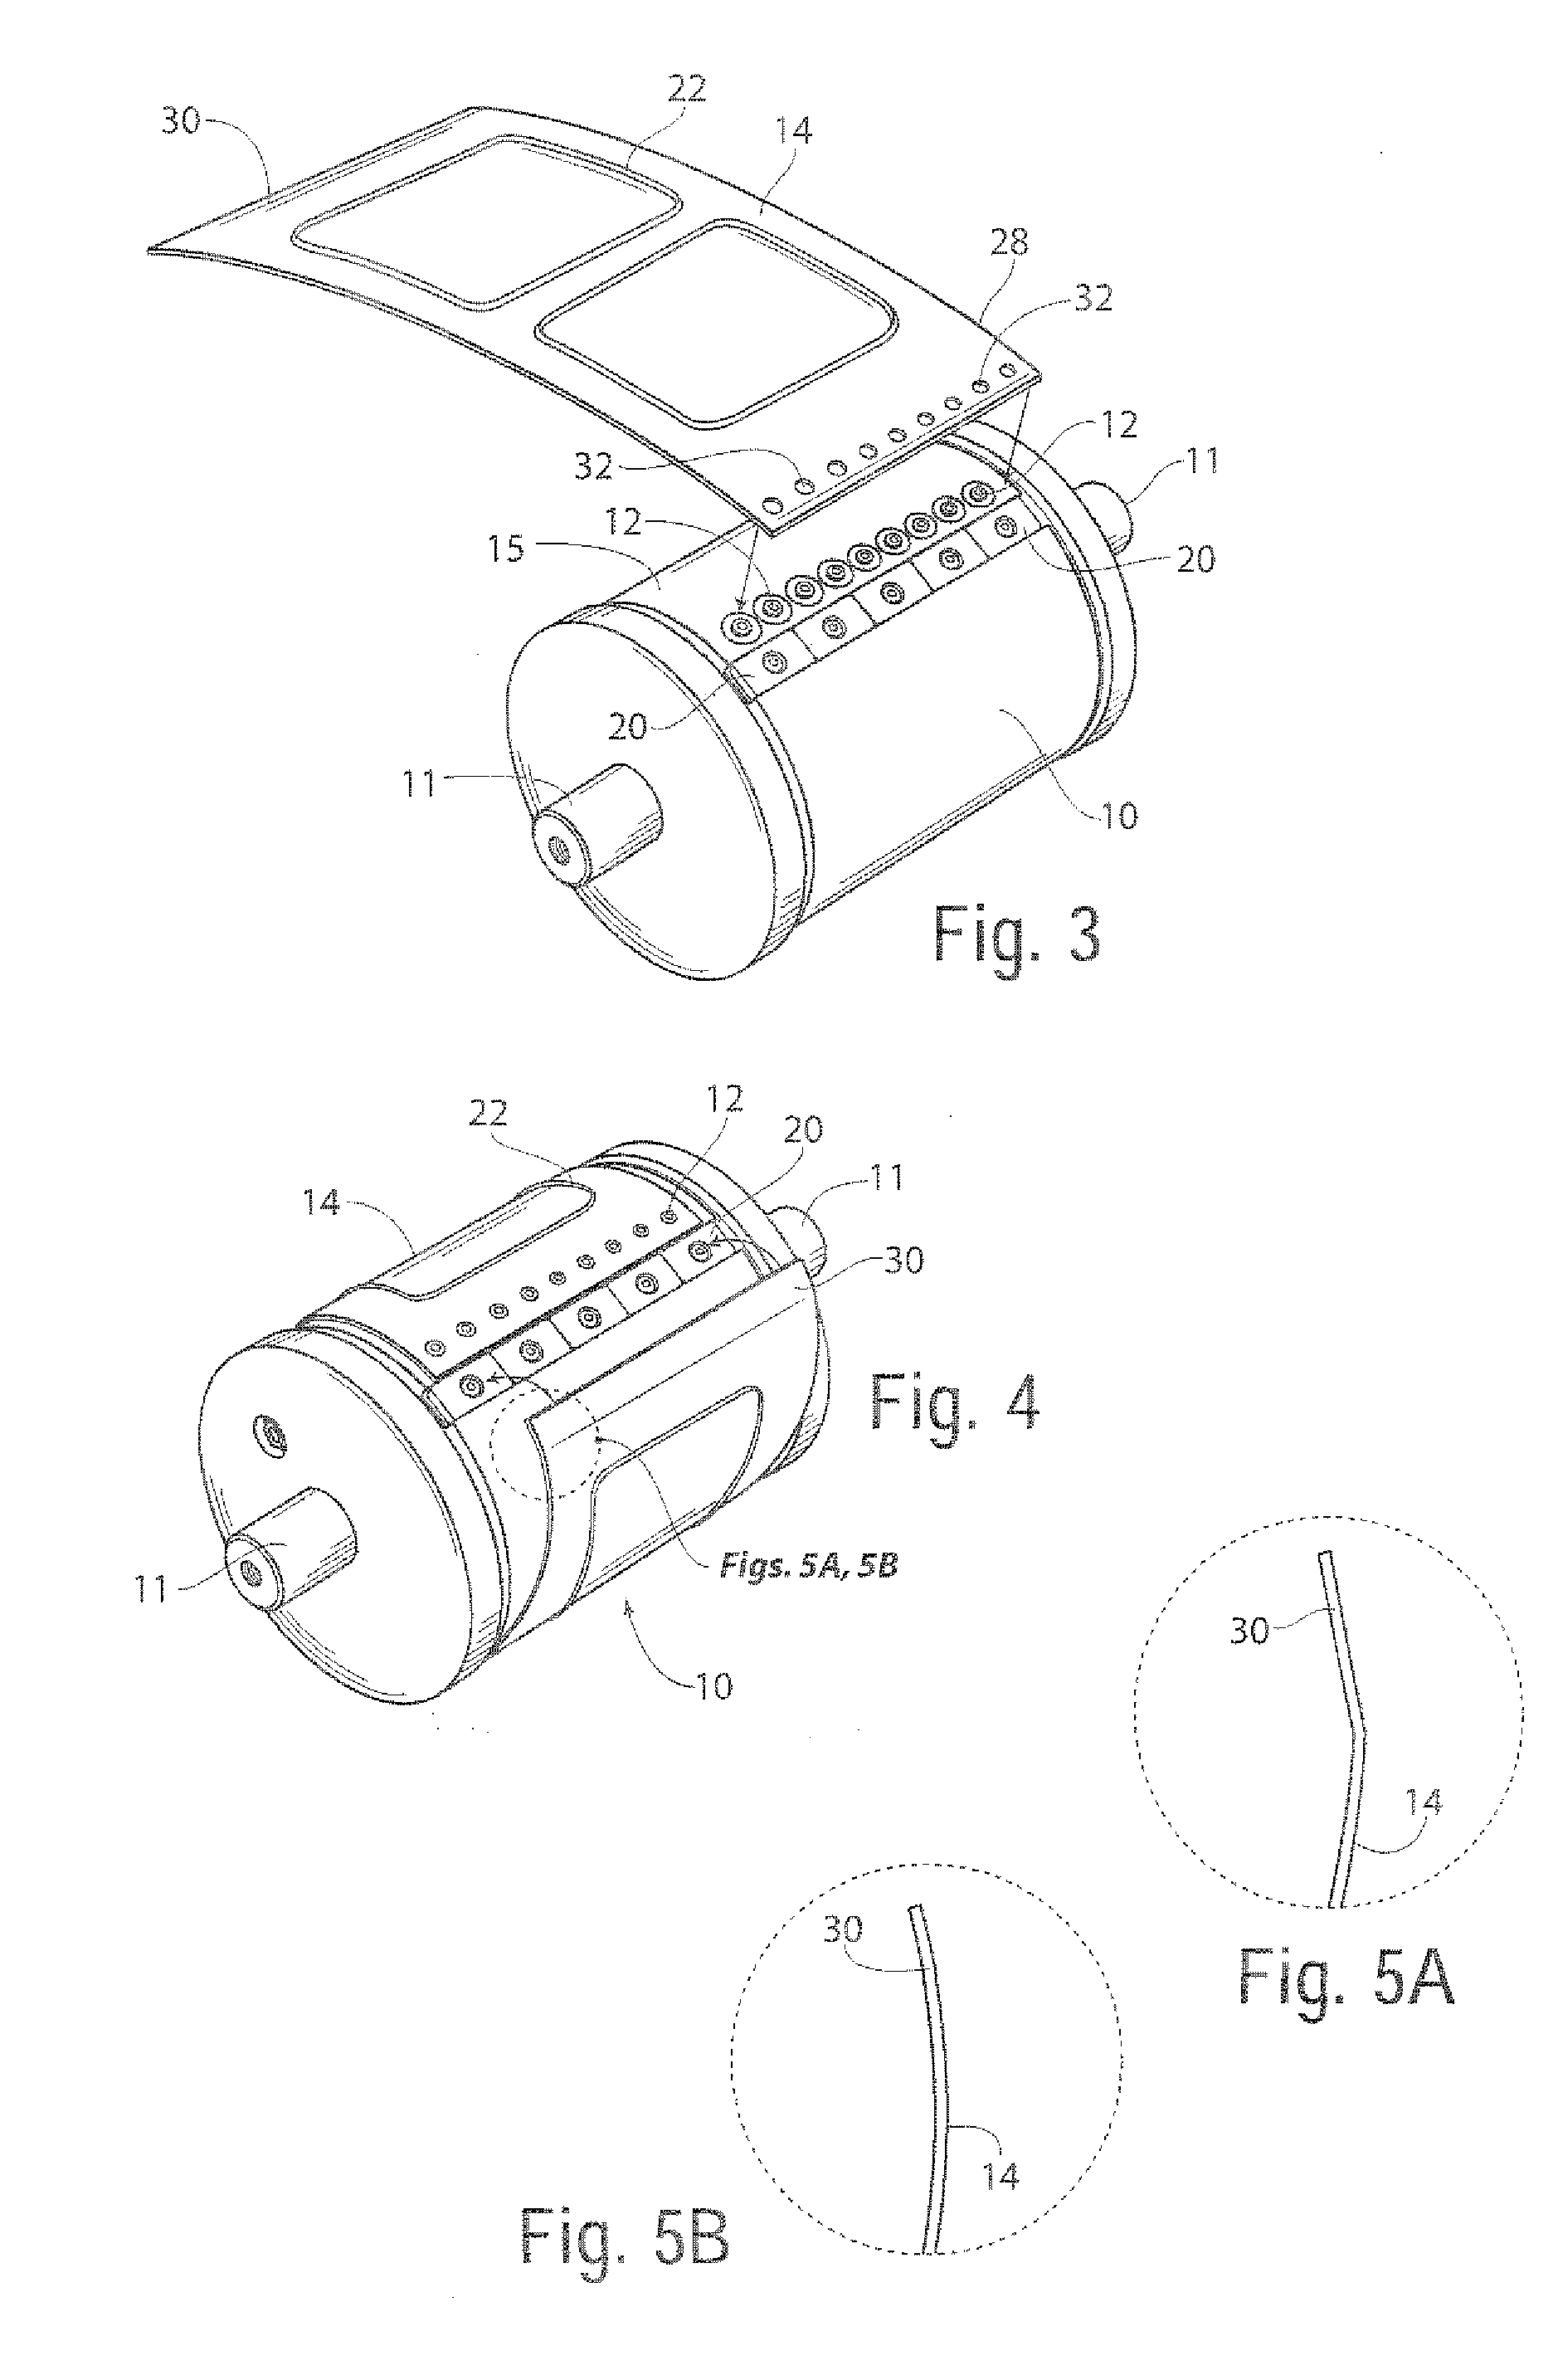 Flexible die retaining system and method